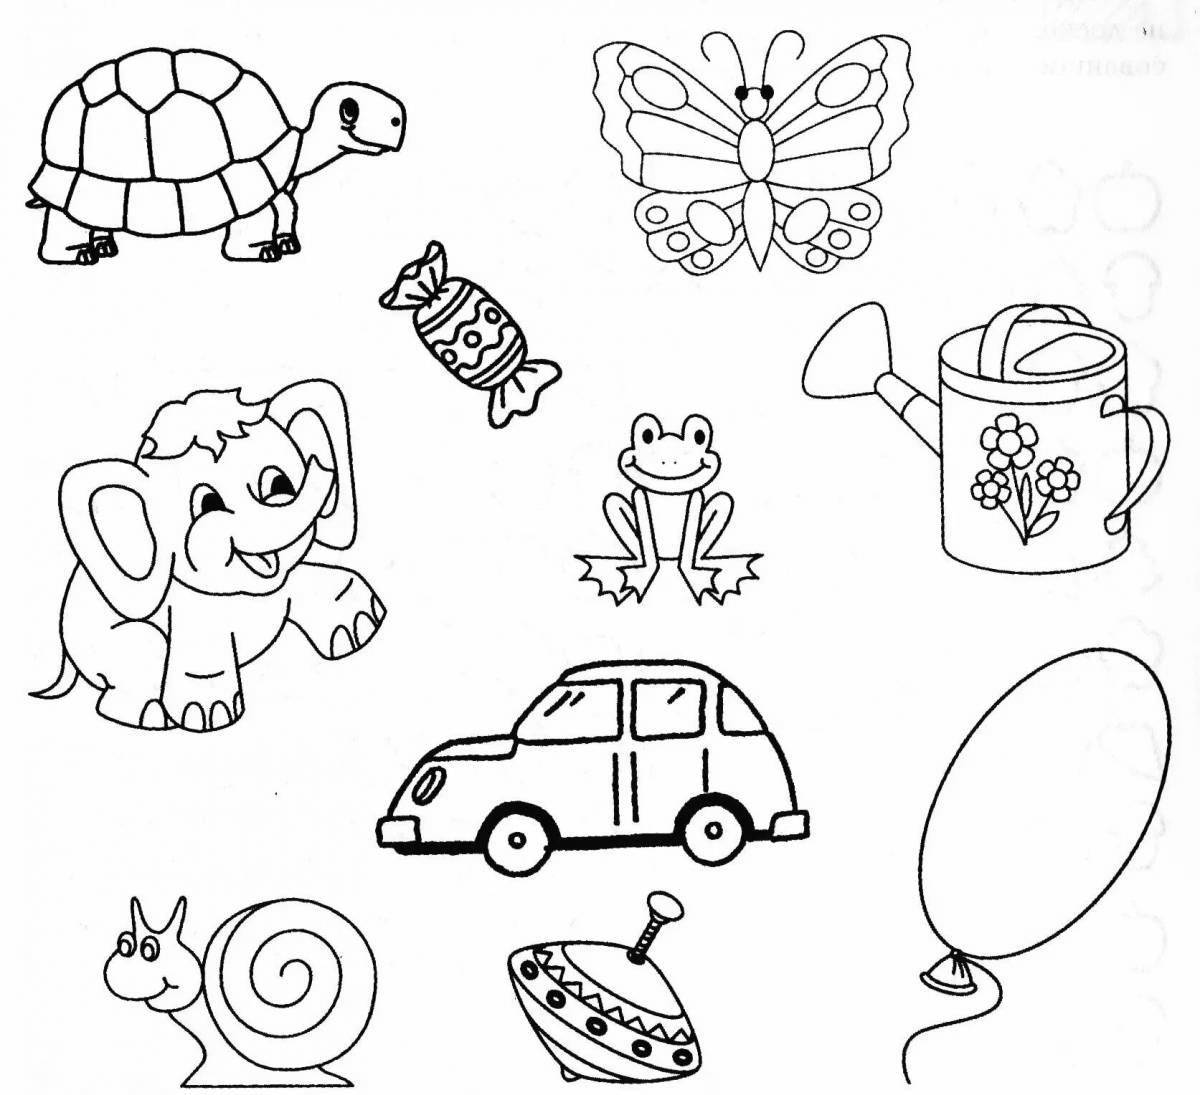 Memory coloring games for toddlers 3-4 years old